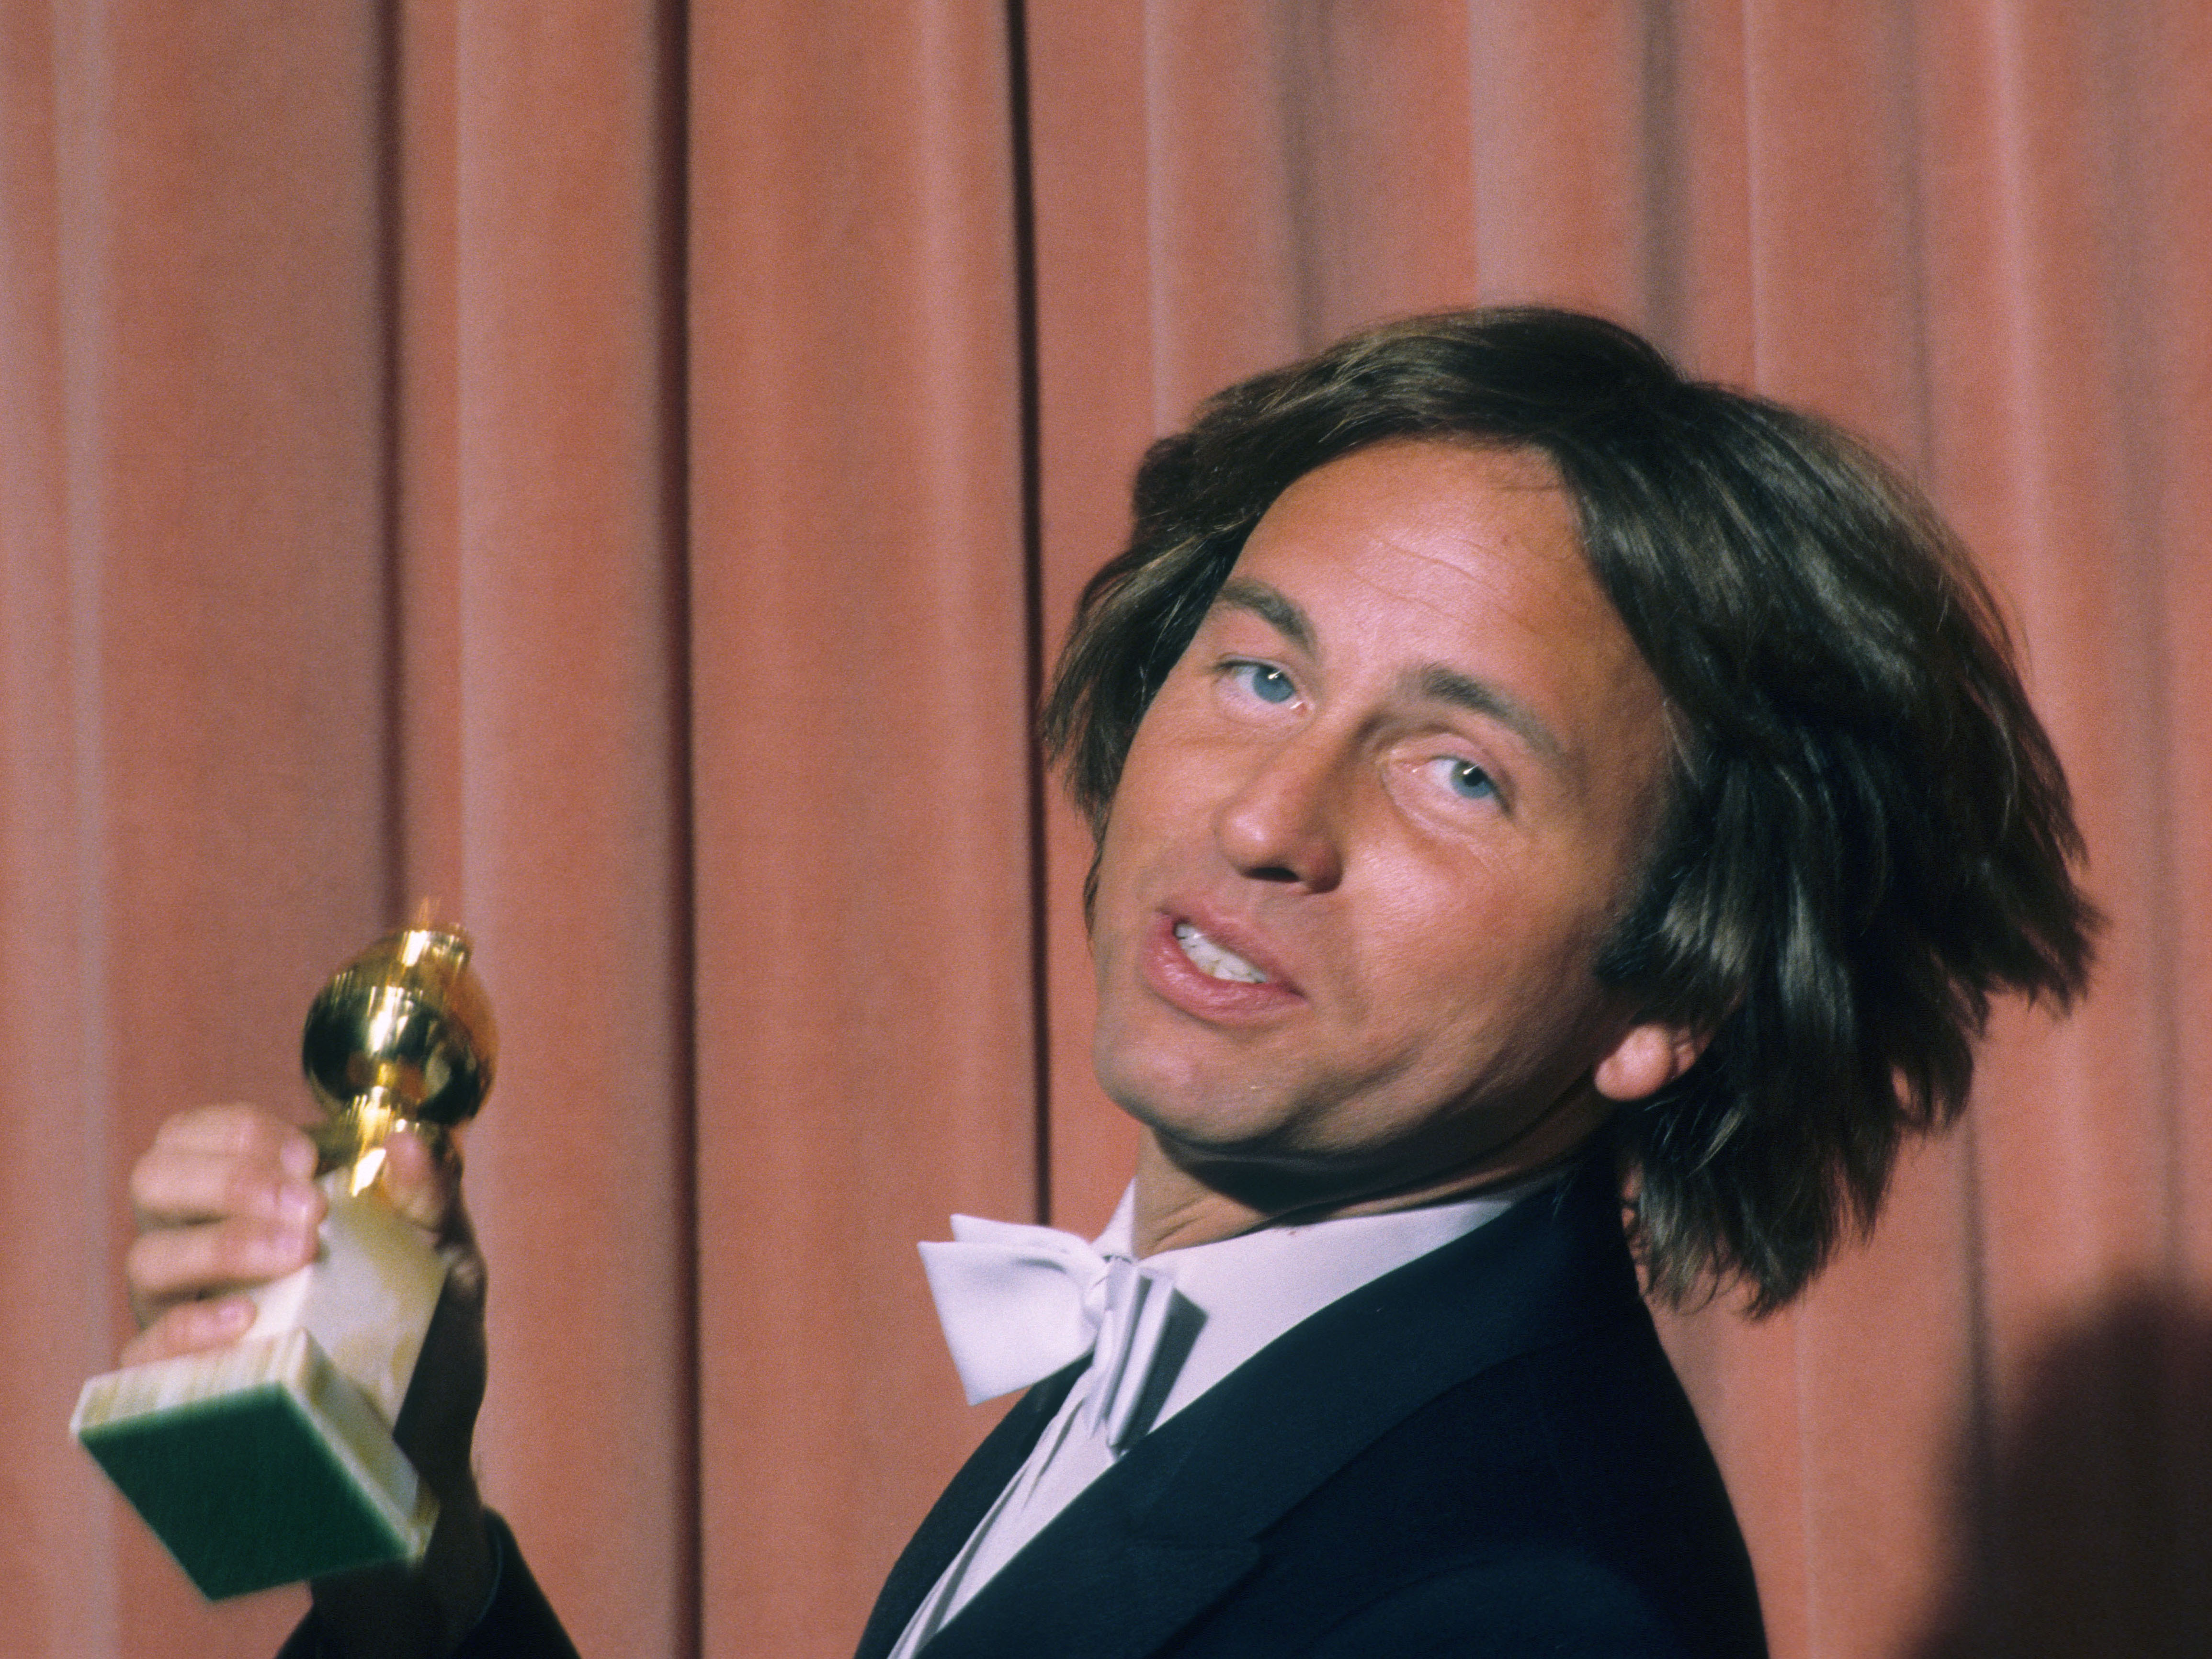 The late John Ritter - 1984 - this photo captures his sense of fun - we mIss you!